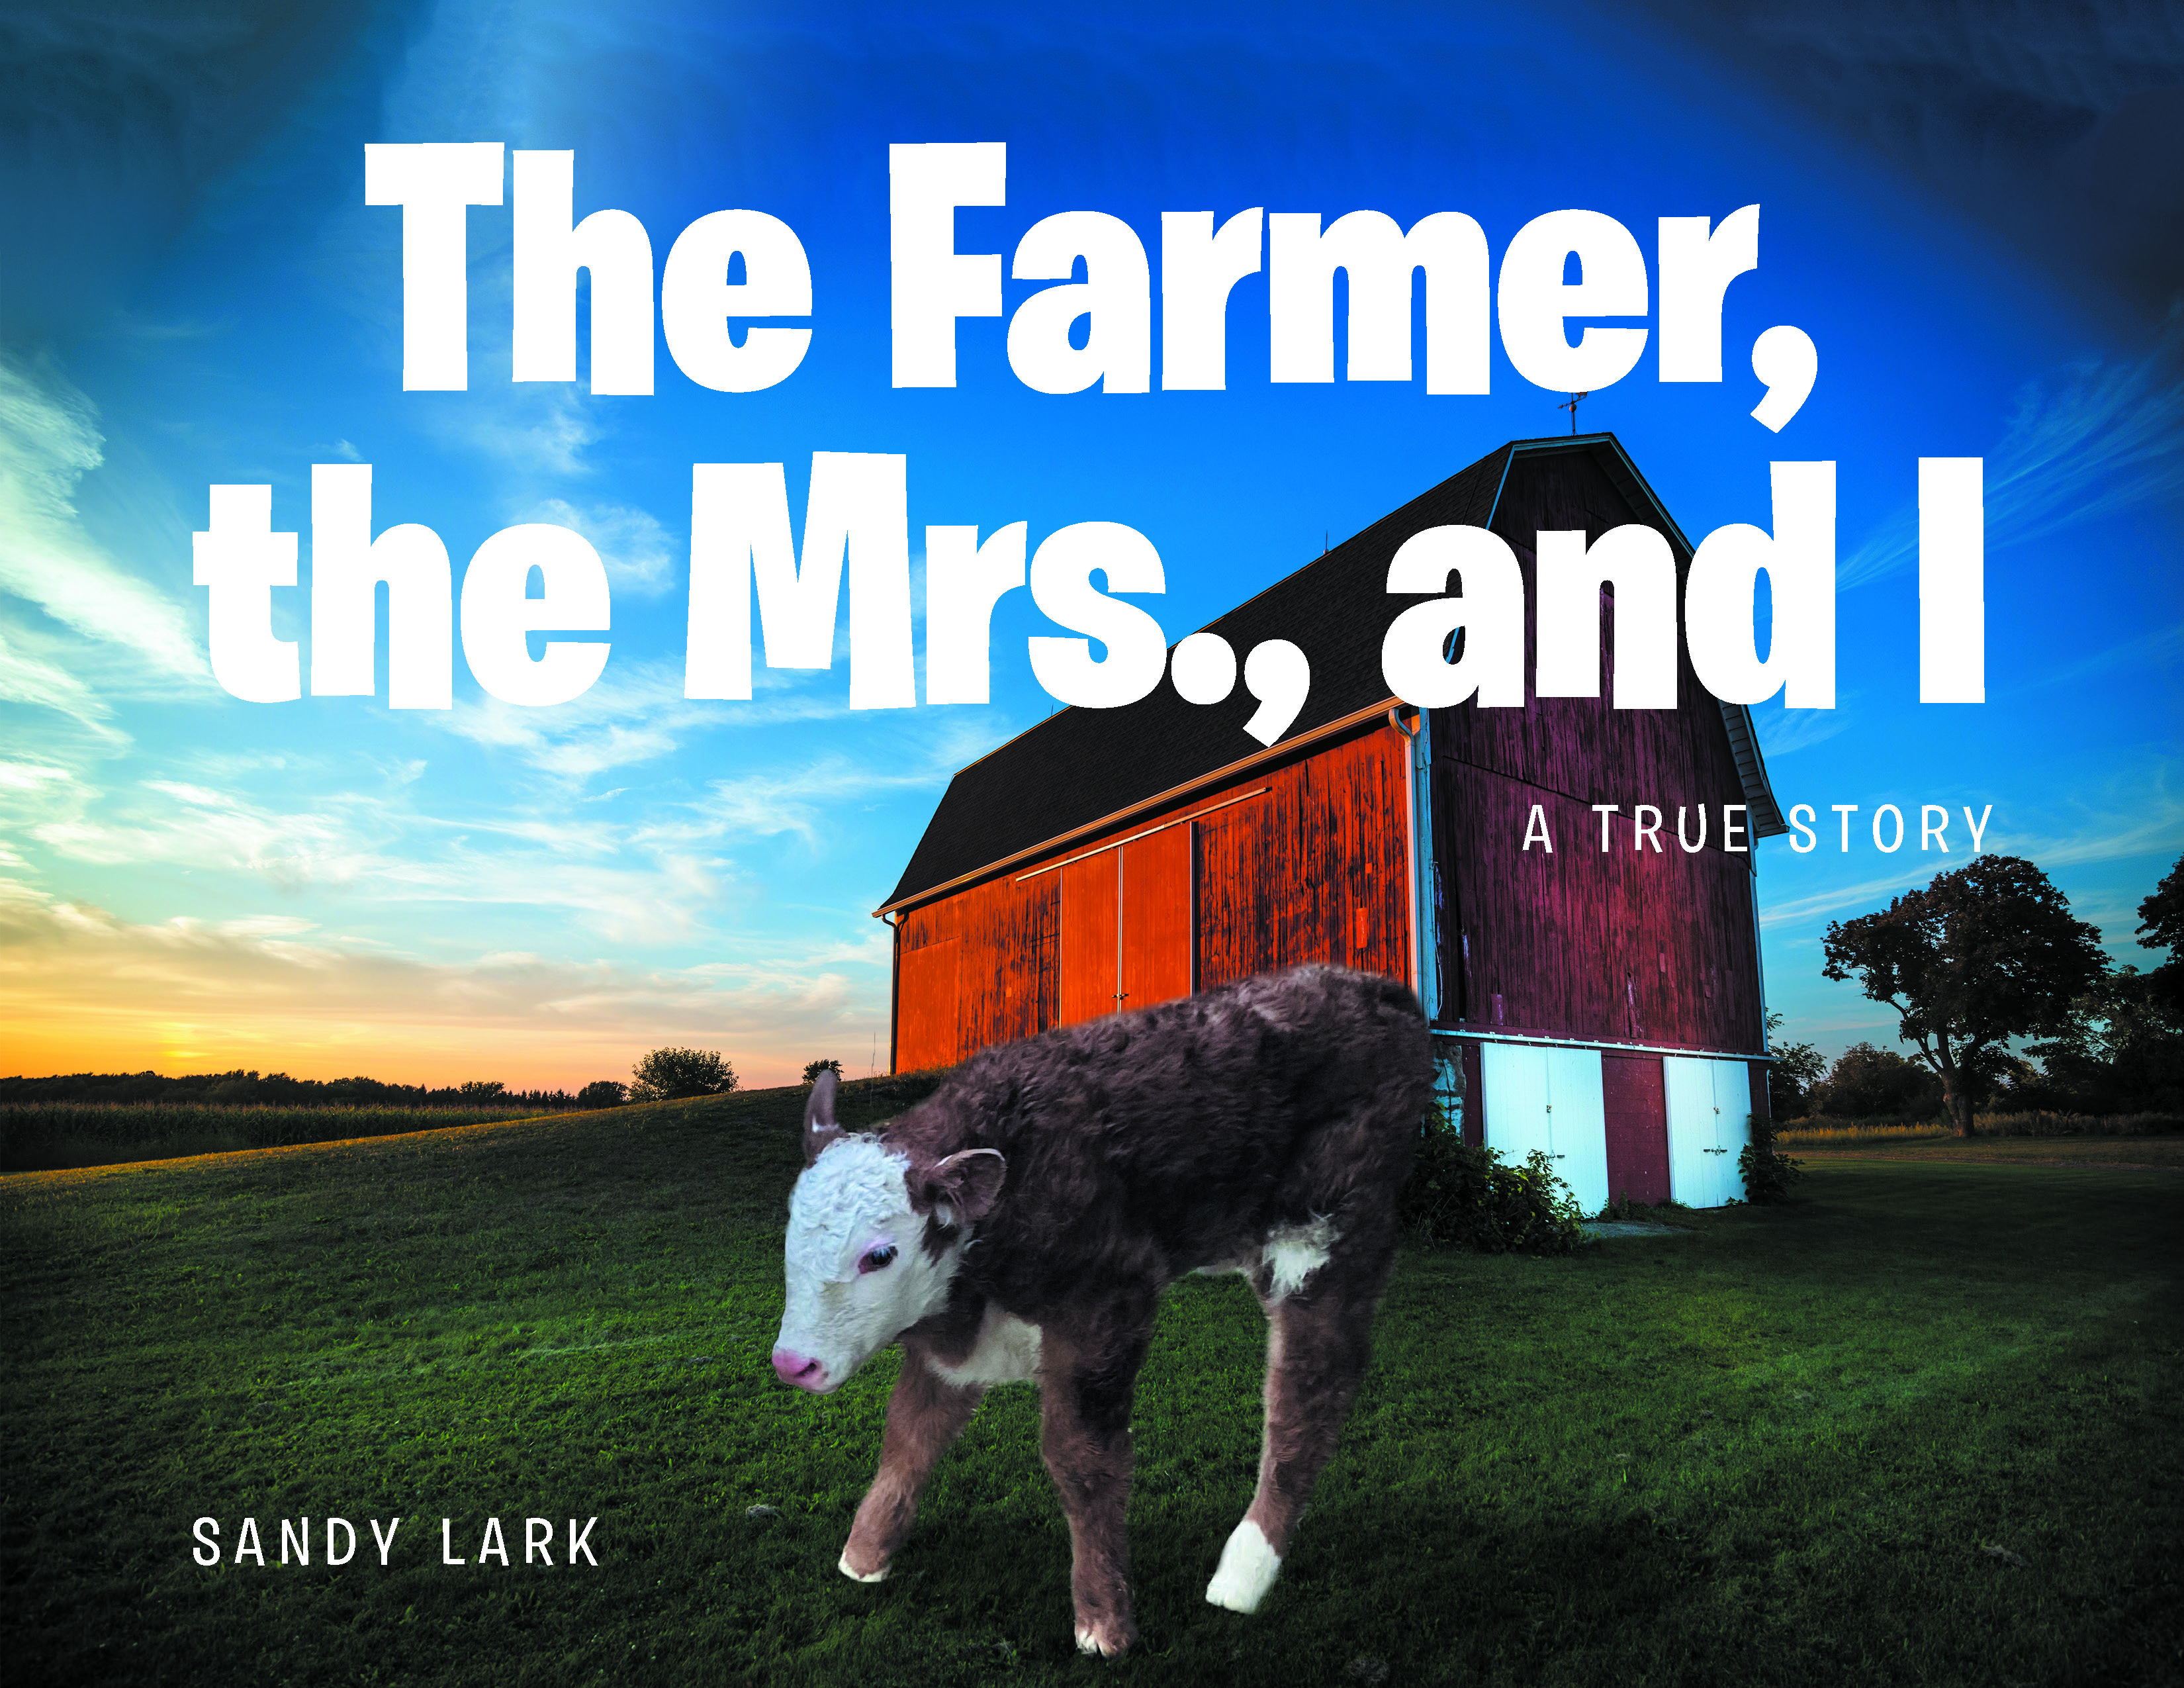 Sandy Lark’s Newly Released "The Farmer, the Mrs., and I" is a Heartwarming Story of Faith and Resilience